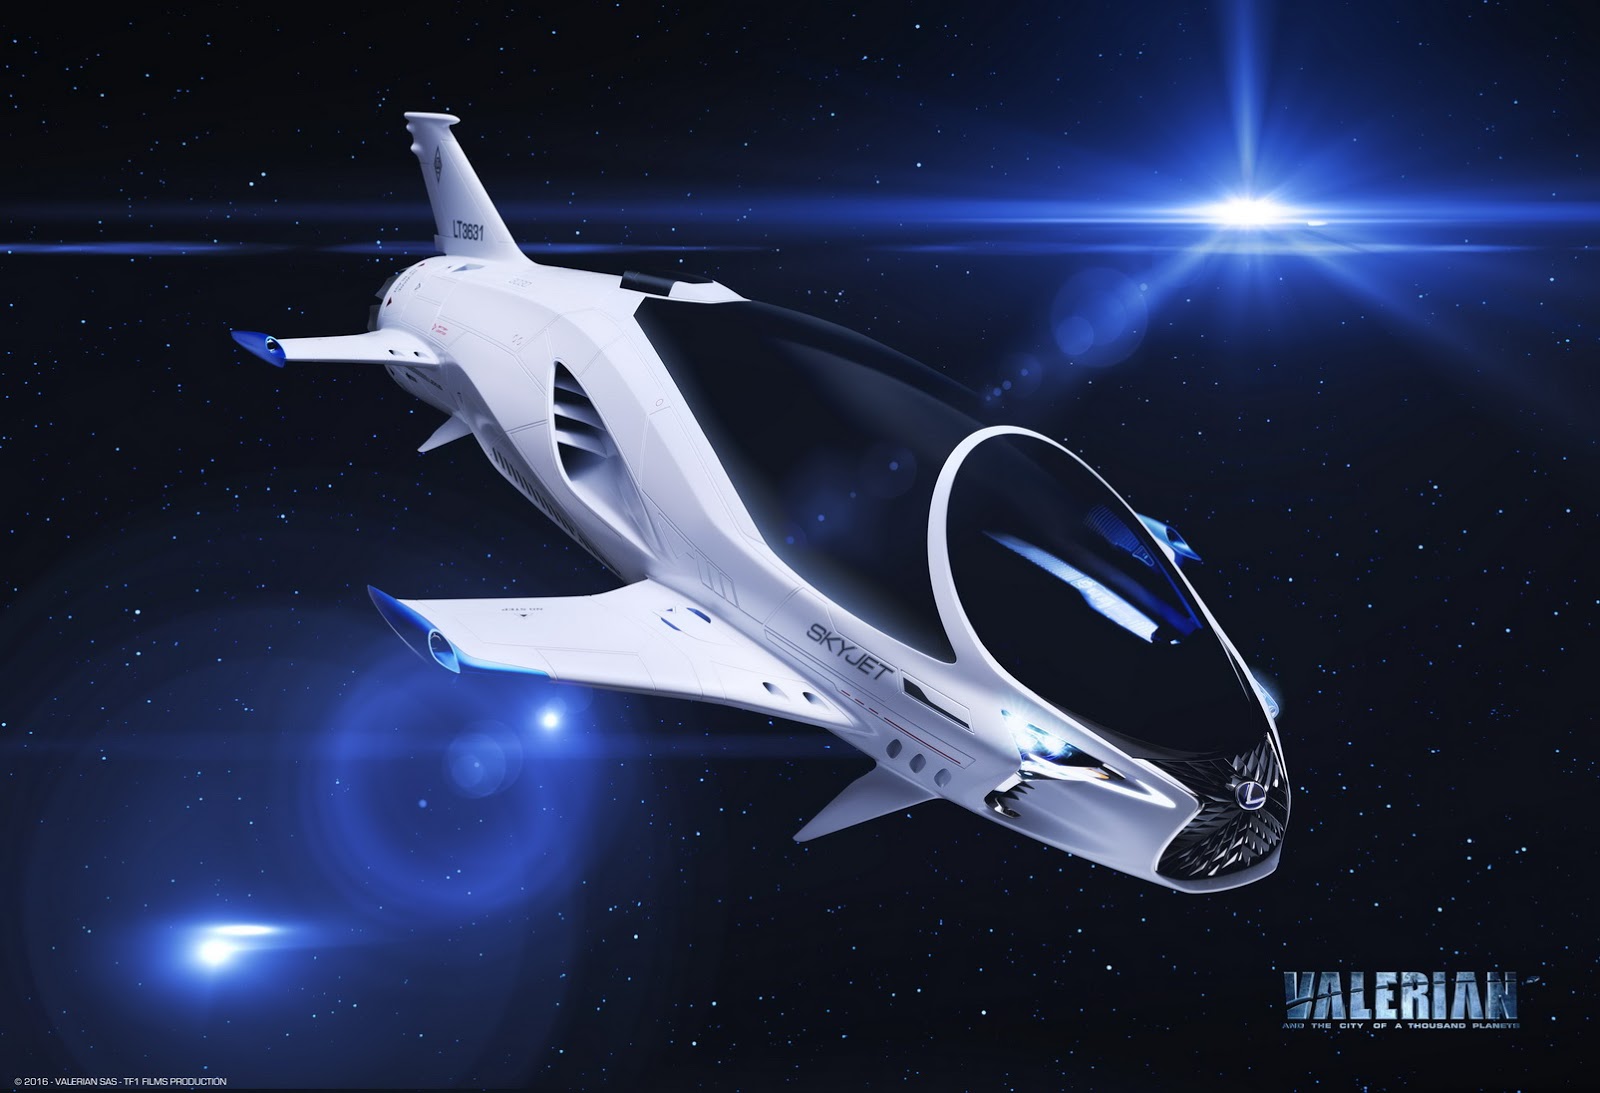 Lexus Skyjet: A 28th Century Spacecraft For "Valerian And The City Of A Thousand Planets"